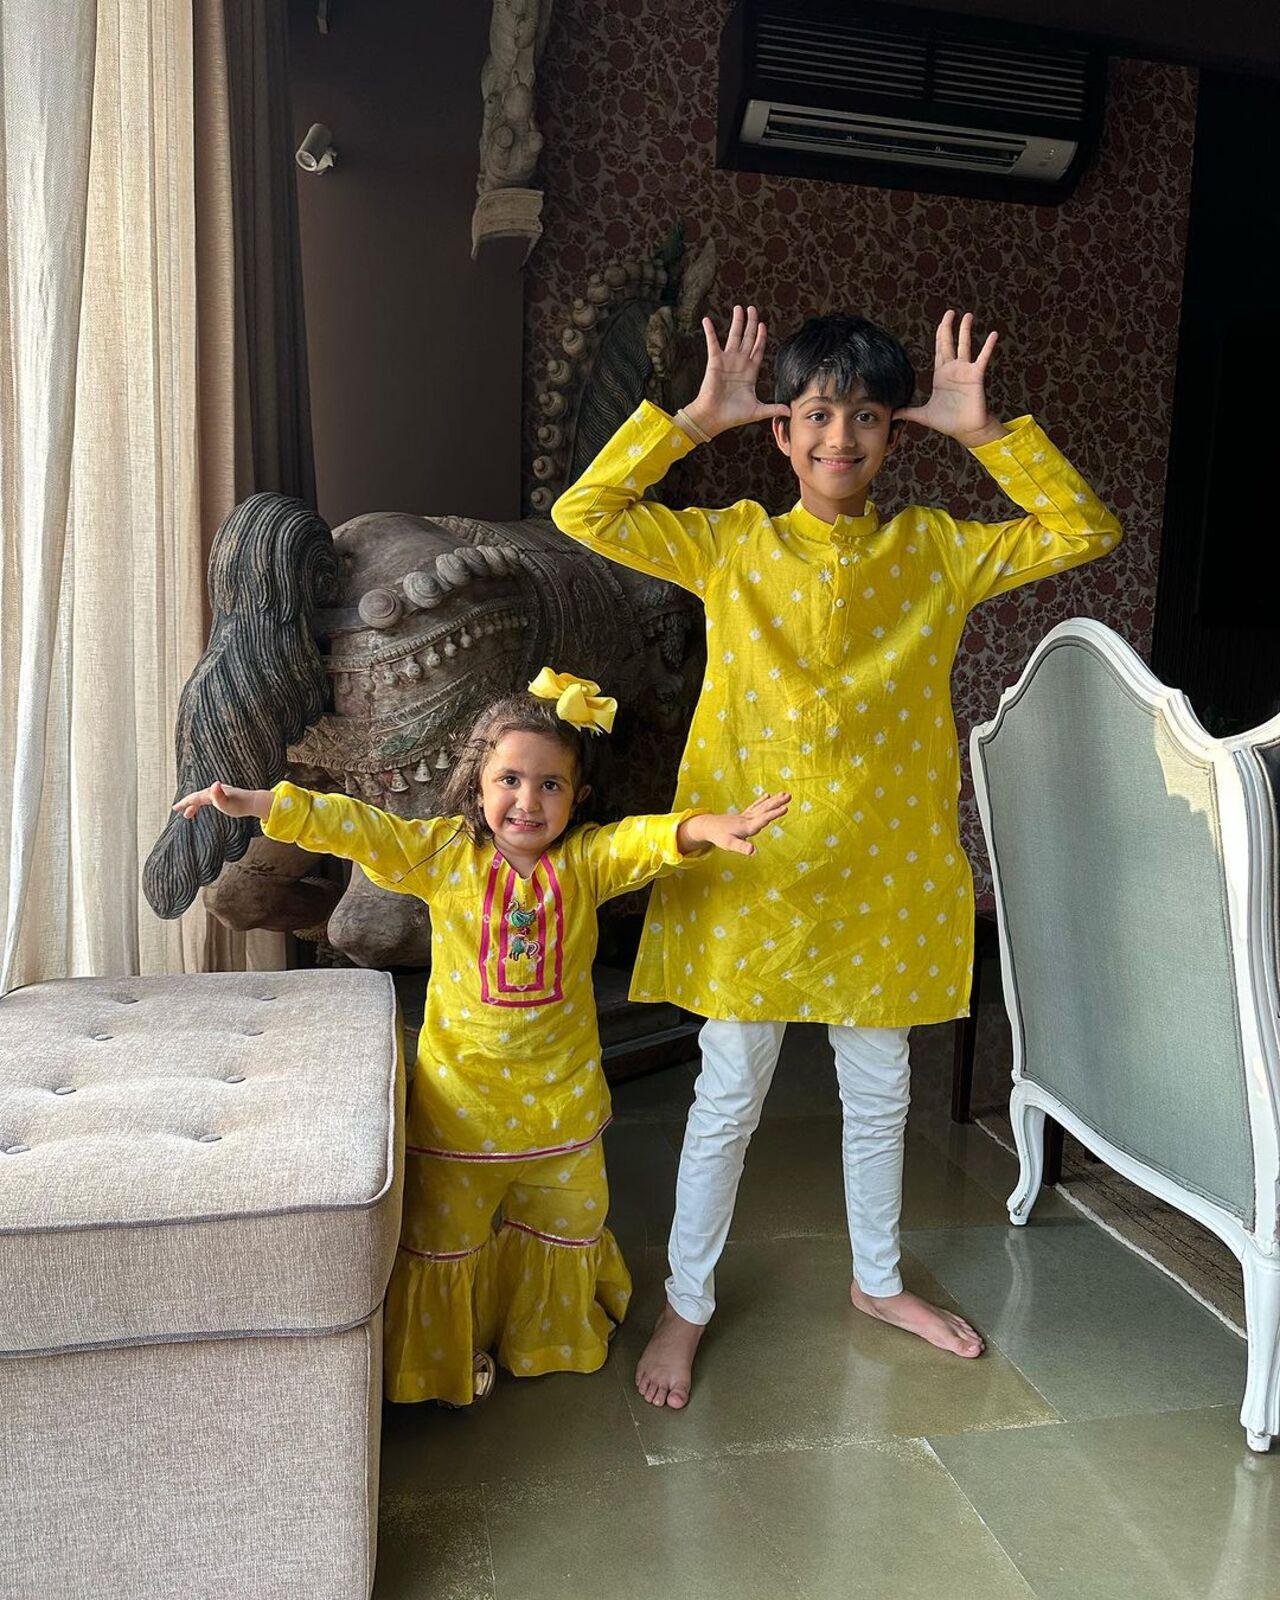 Shilpa Shetty Kundra shared adorable pictures of her kids from their rakhi celebrations. The kids are seen matching in yellow outfit